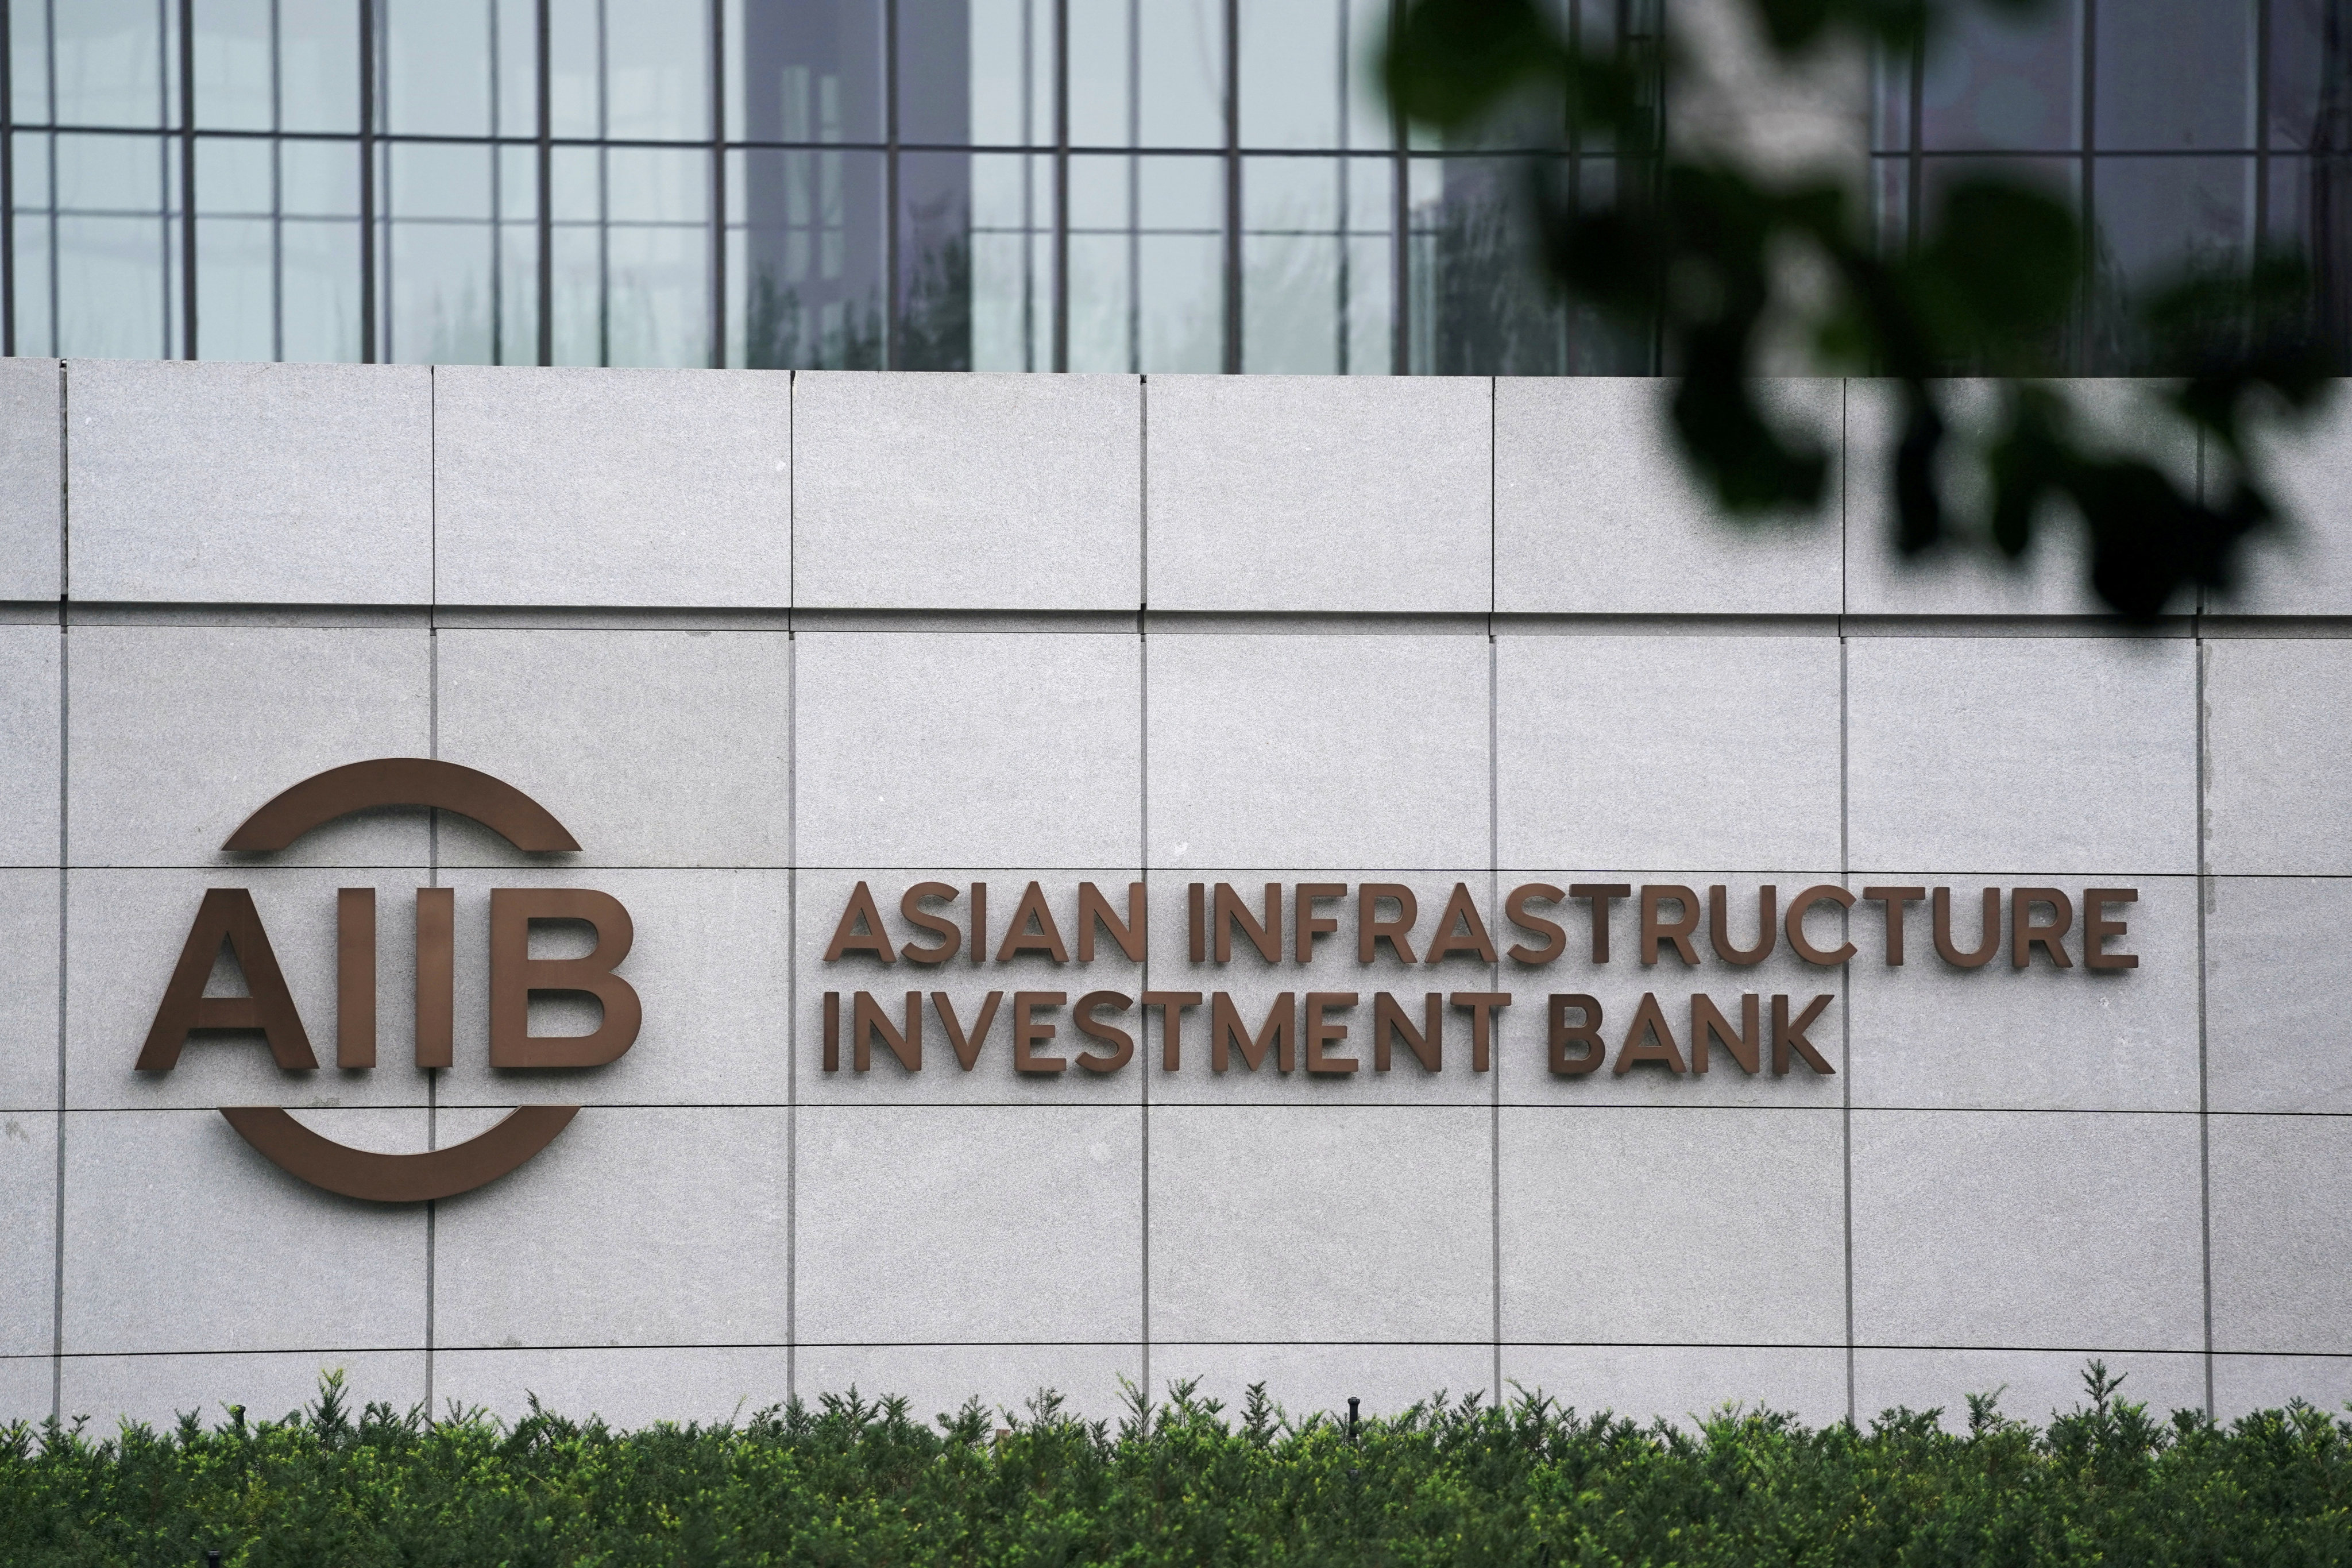 The Asian Infrastructure Investment Bank’s headquarters in Beijing, seen on July 27, 2020. Photo: Reuters